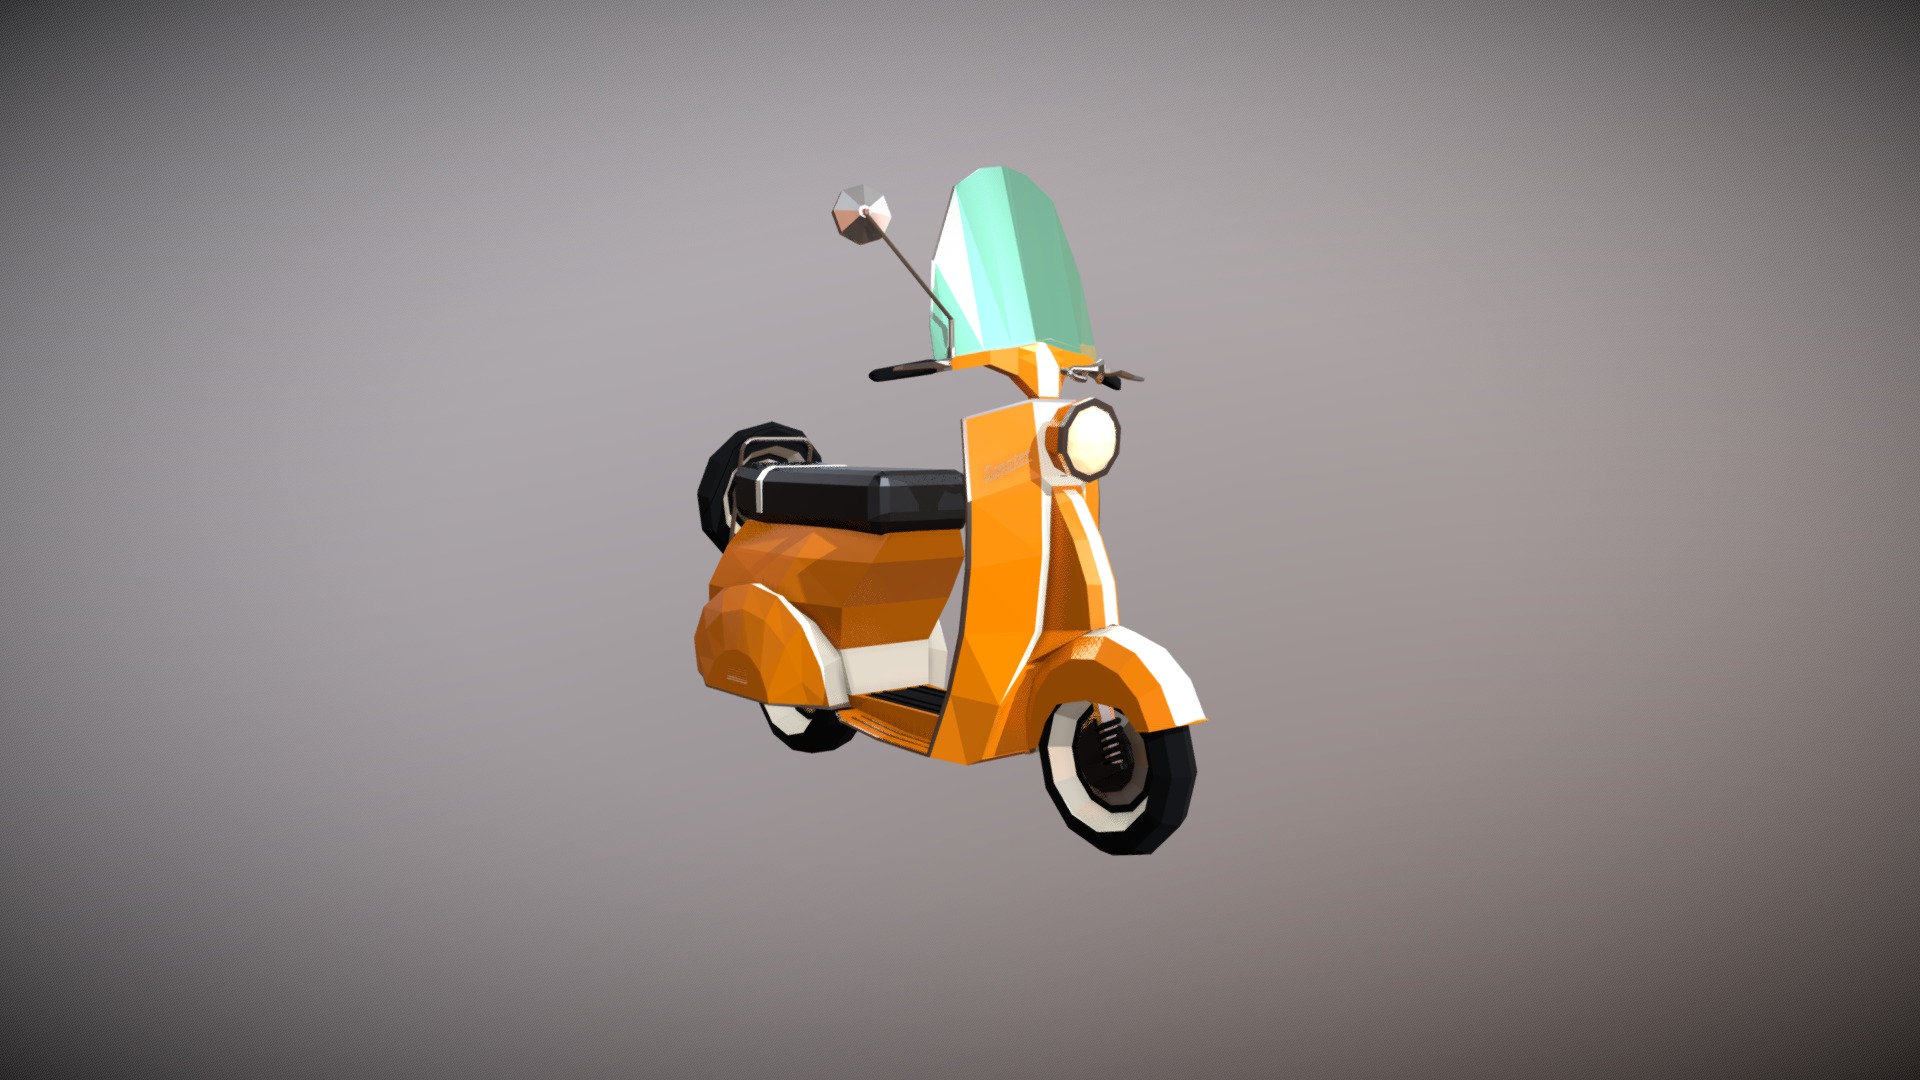 3D model Low Poly Scooter 02 - This is a 3D model of the Low Poly Scooter 02. The 3D model is about a small yellow and black scooter.